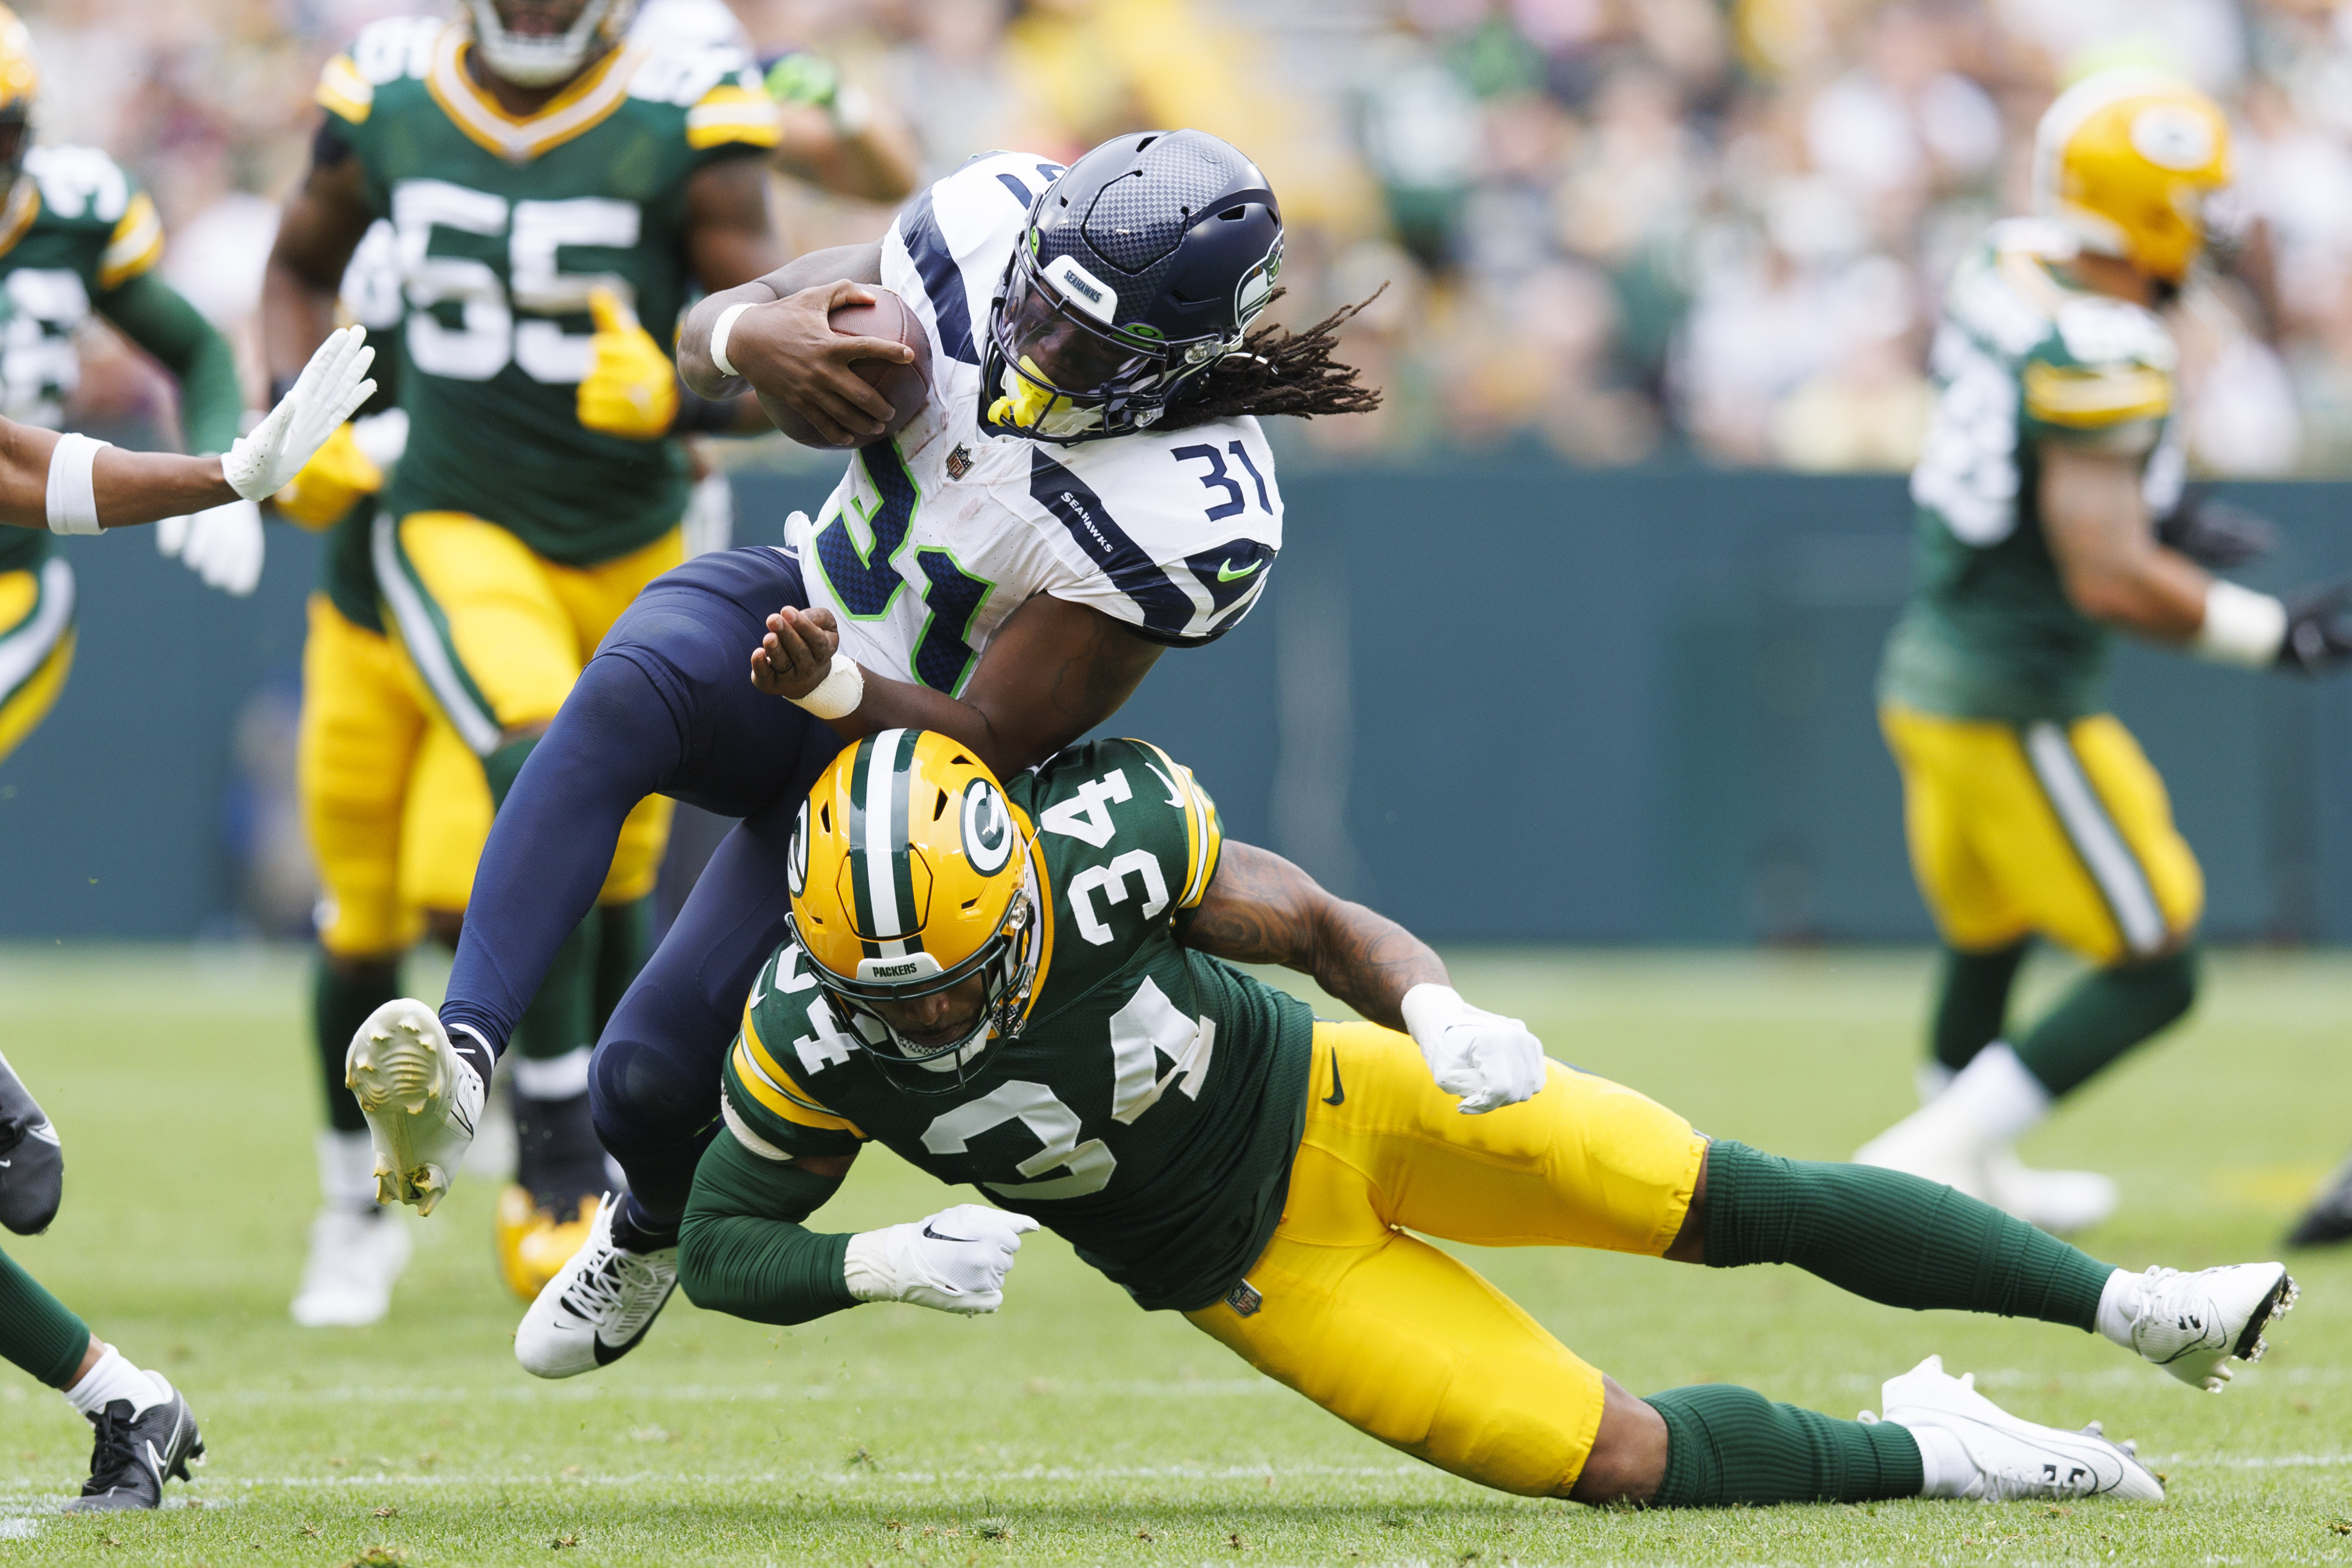 Packers score late, hang on to defeat Seahawks